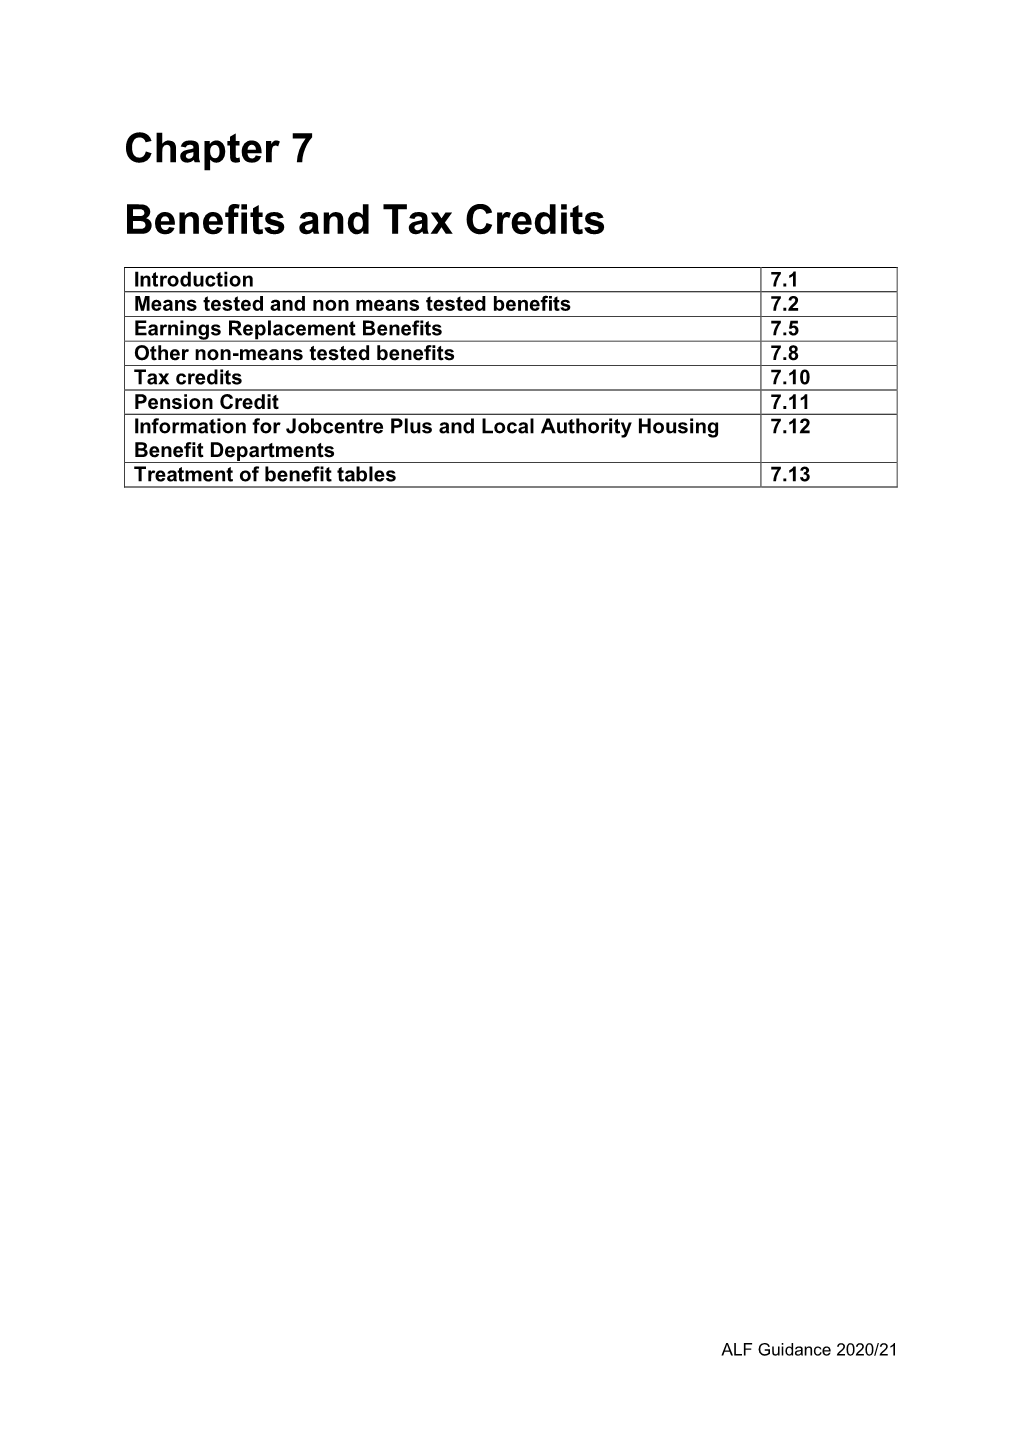 Chapter 7 Benefits and Tax Credits